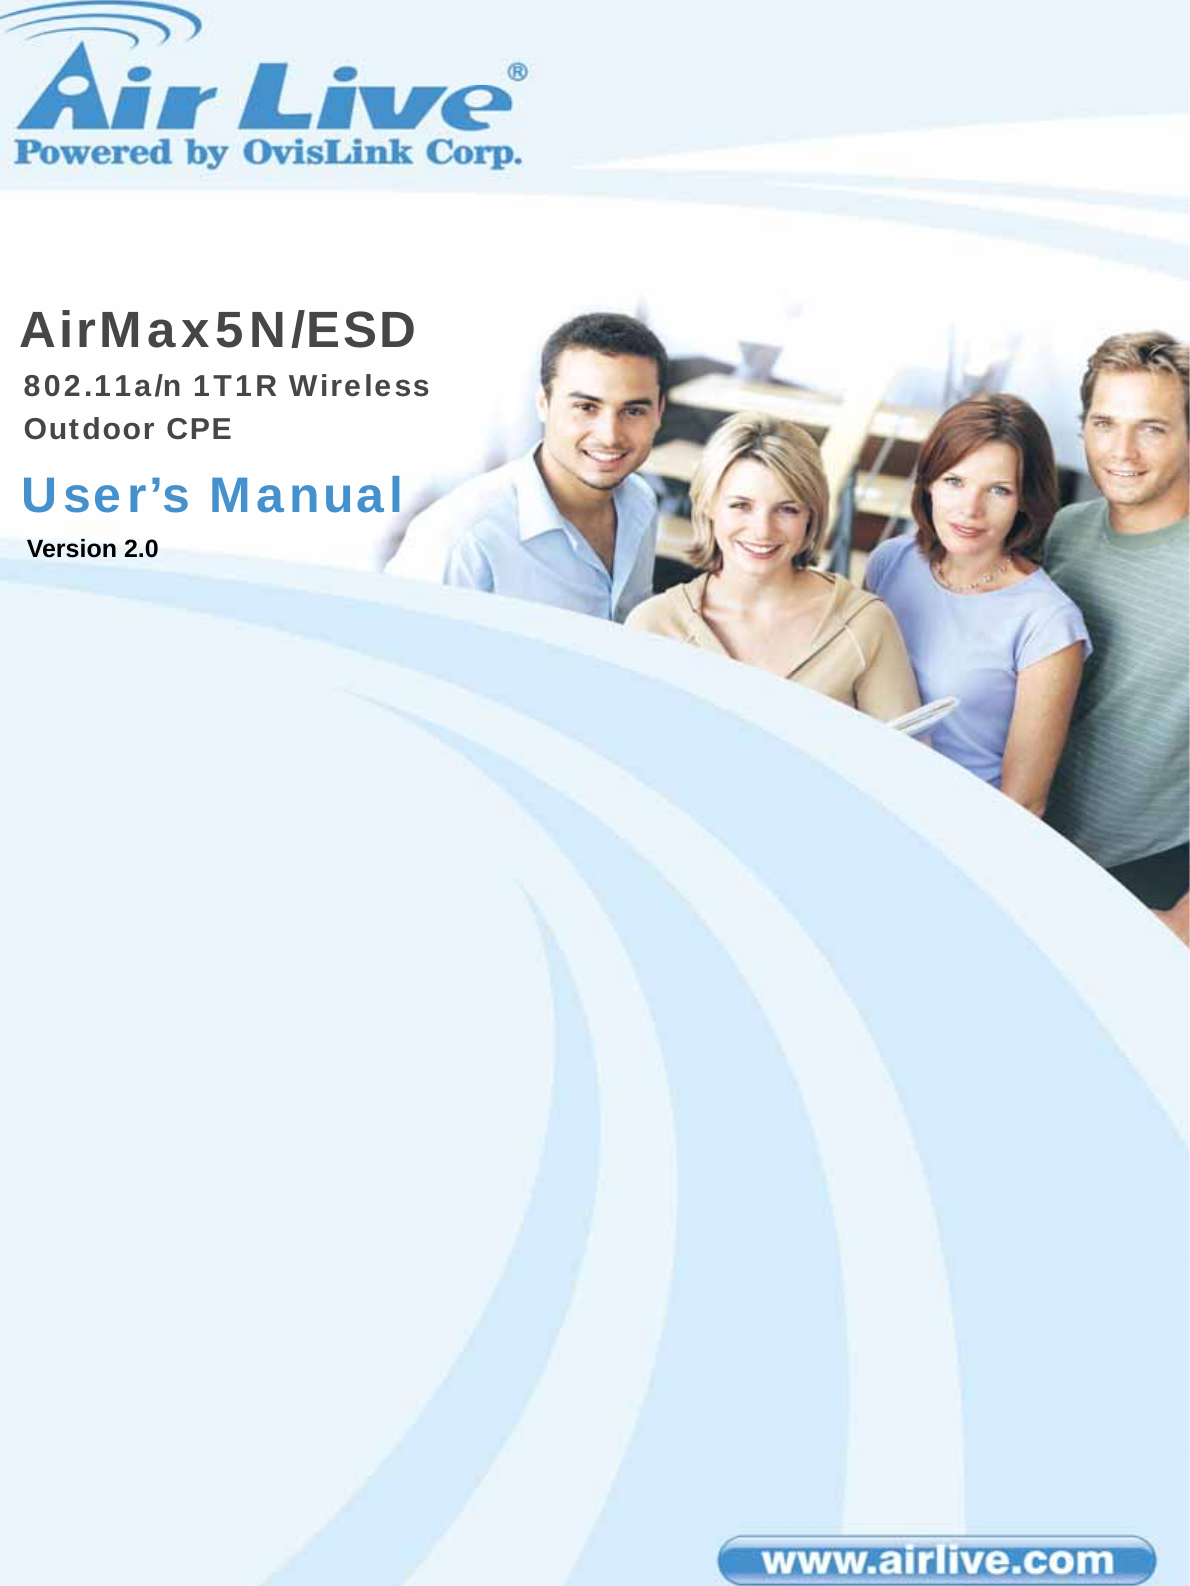 AirMax5N/ESD  802.11a/n 1T1R Wireless Outdoor CPE User’s Manual Version 2.0 